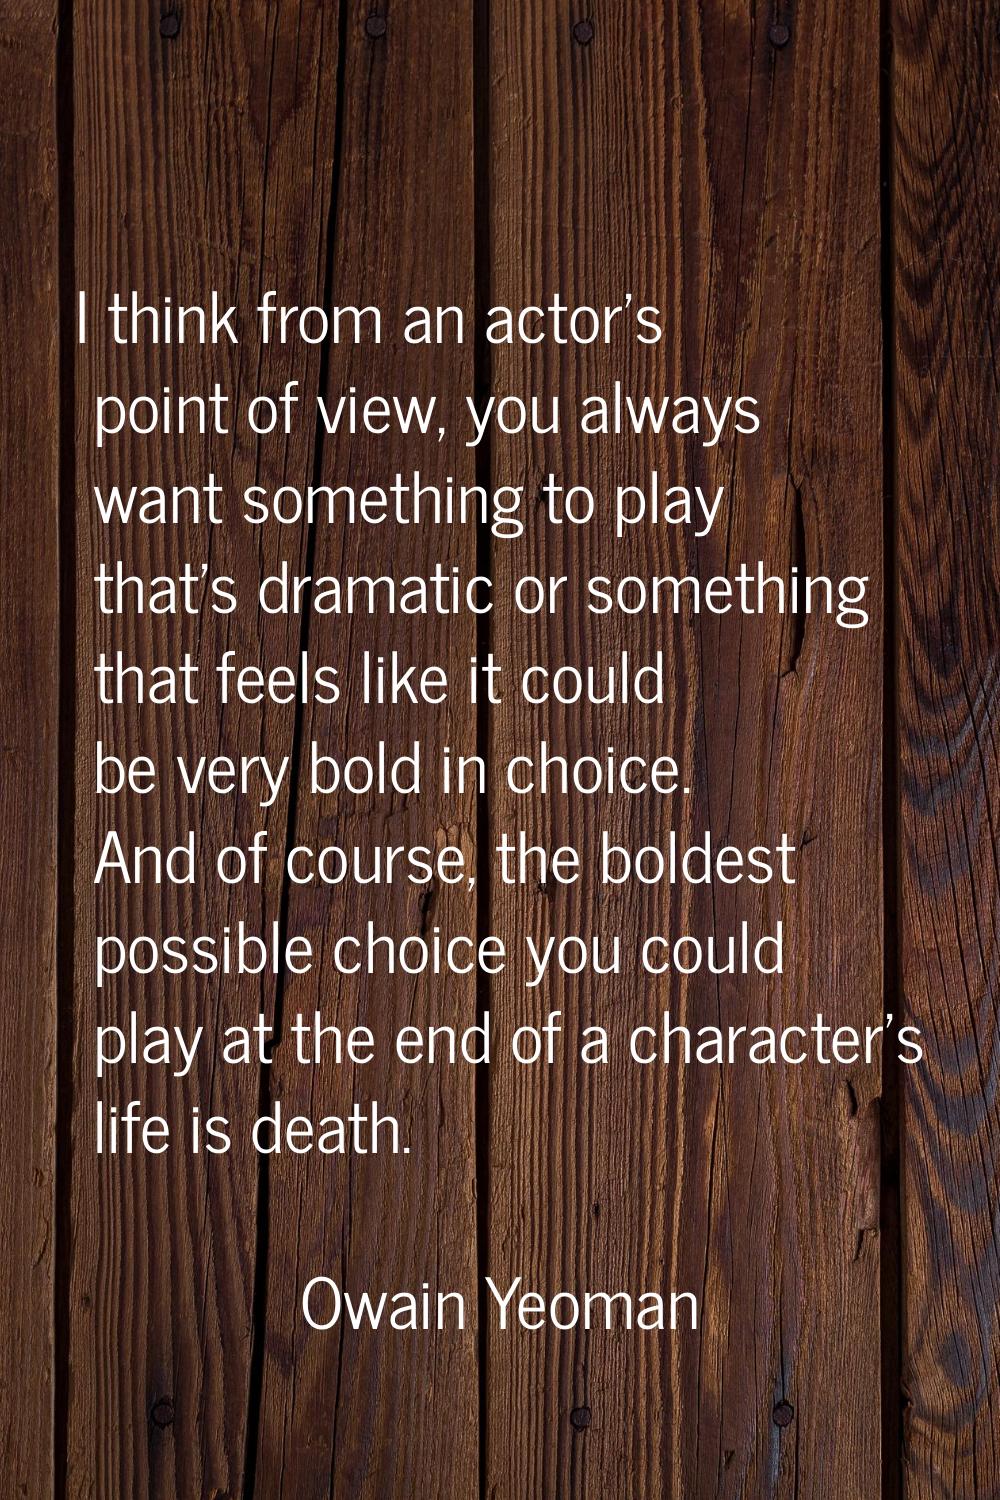 I think from an actor's point of view, you always want something to play that's dramatic or somethi